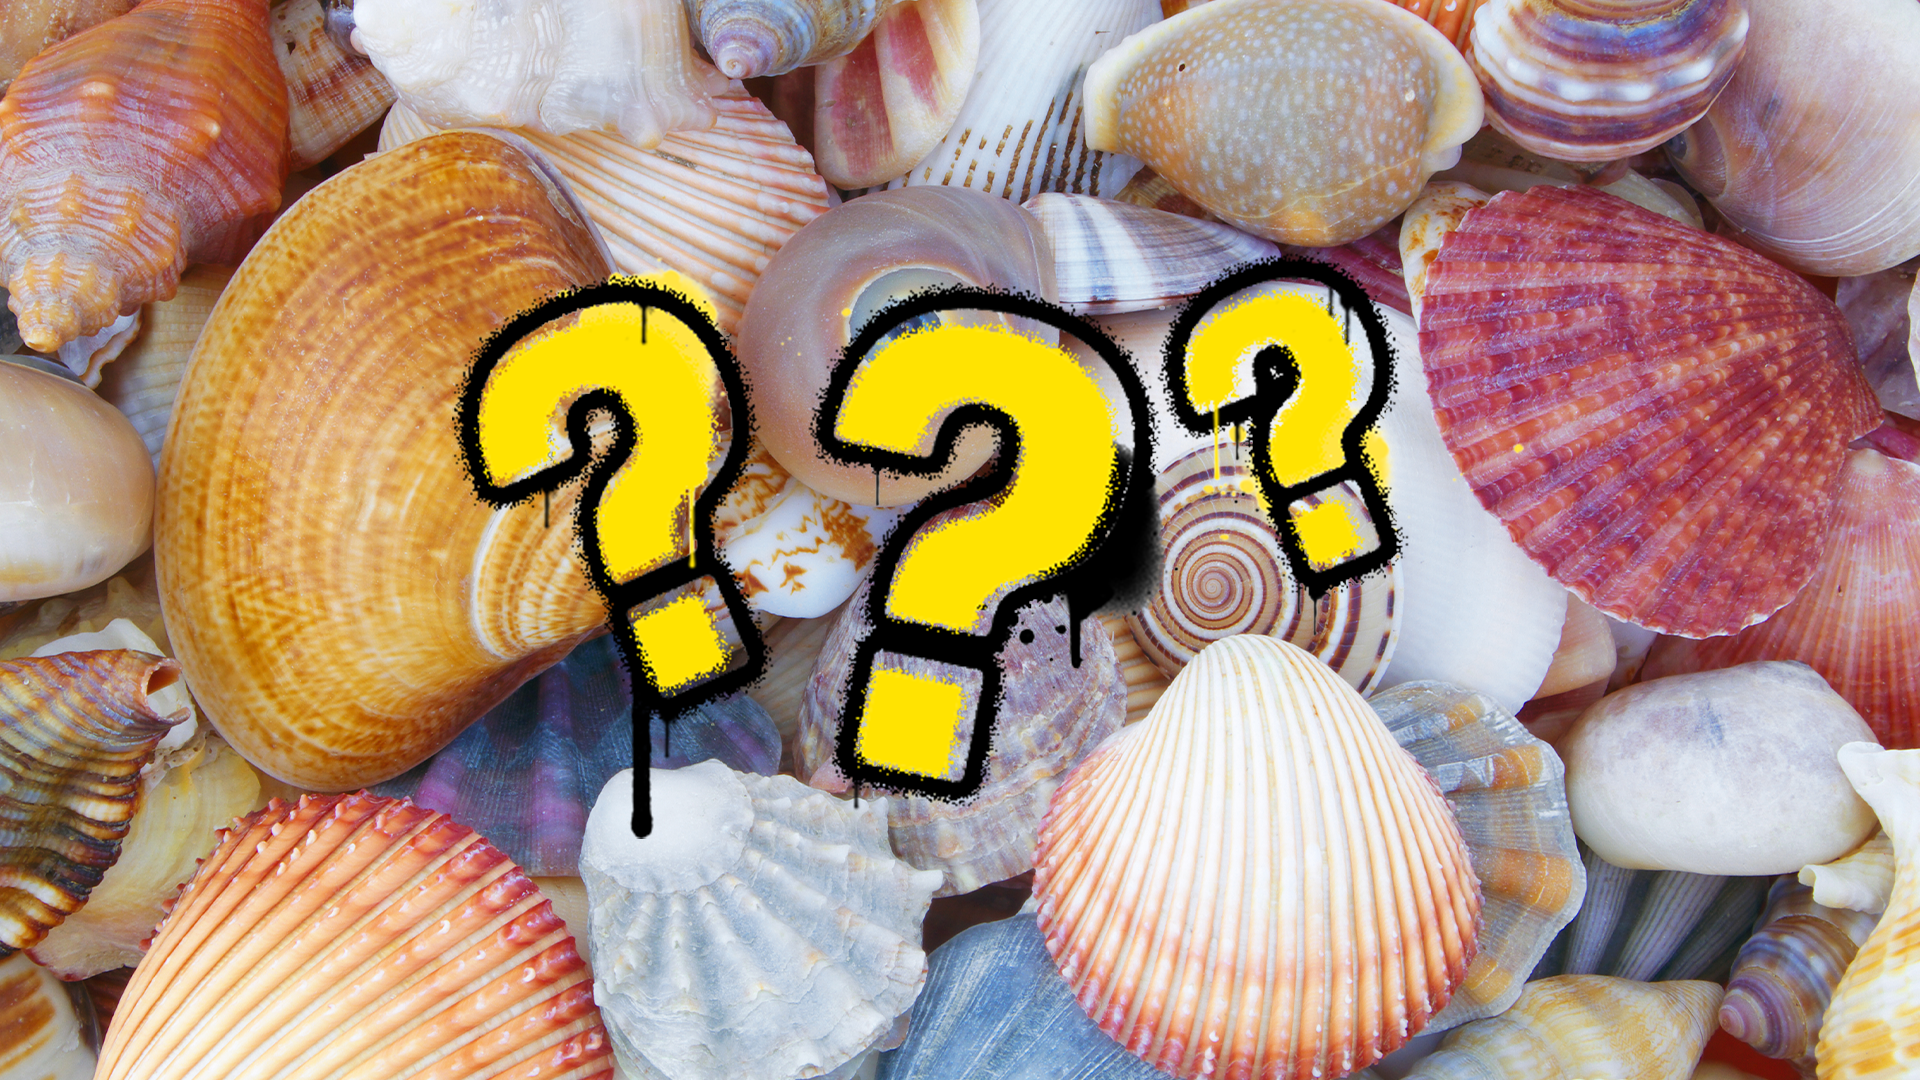 Shells and question marks